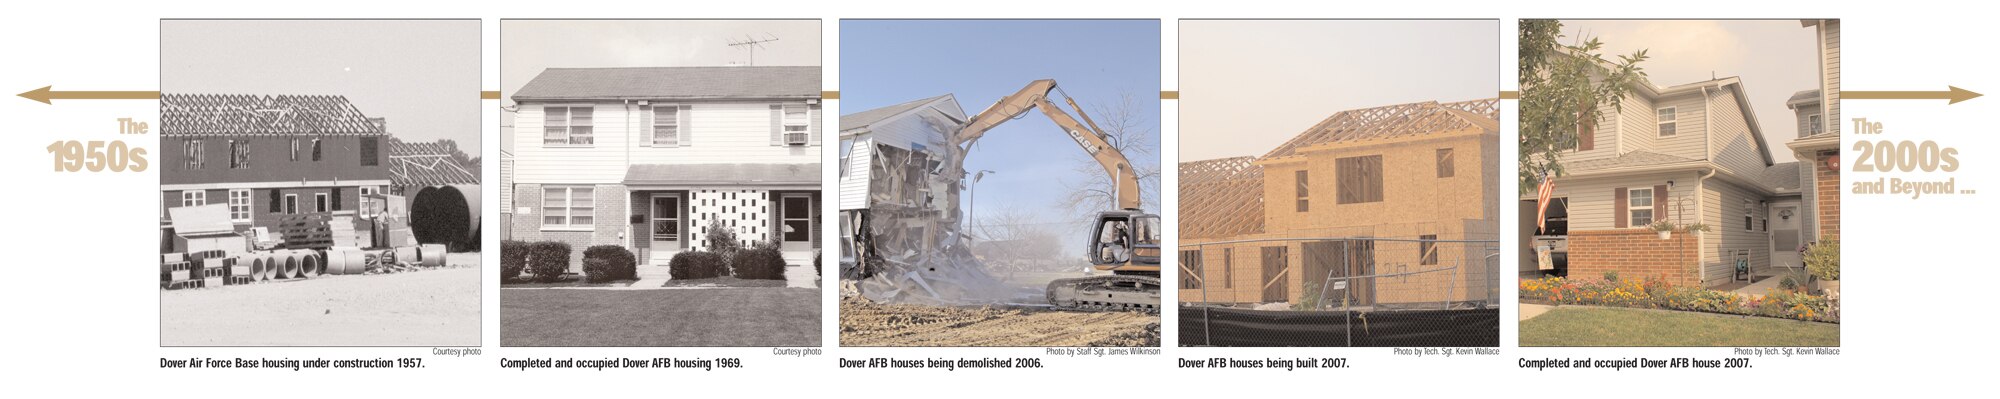 Dover Air Force Base housing timeline, illustrating progression of base housing here from the 1950s through today. (Photo illustration/Tech. Sgt. Kevin Wallace)